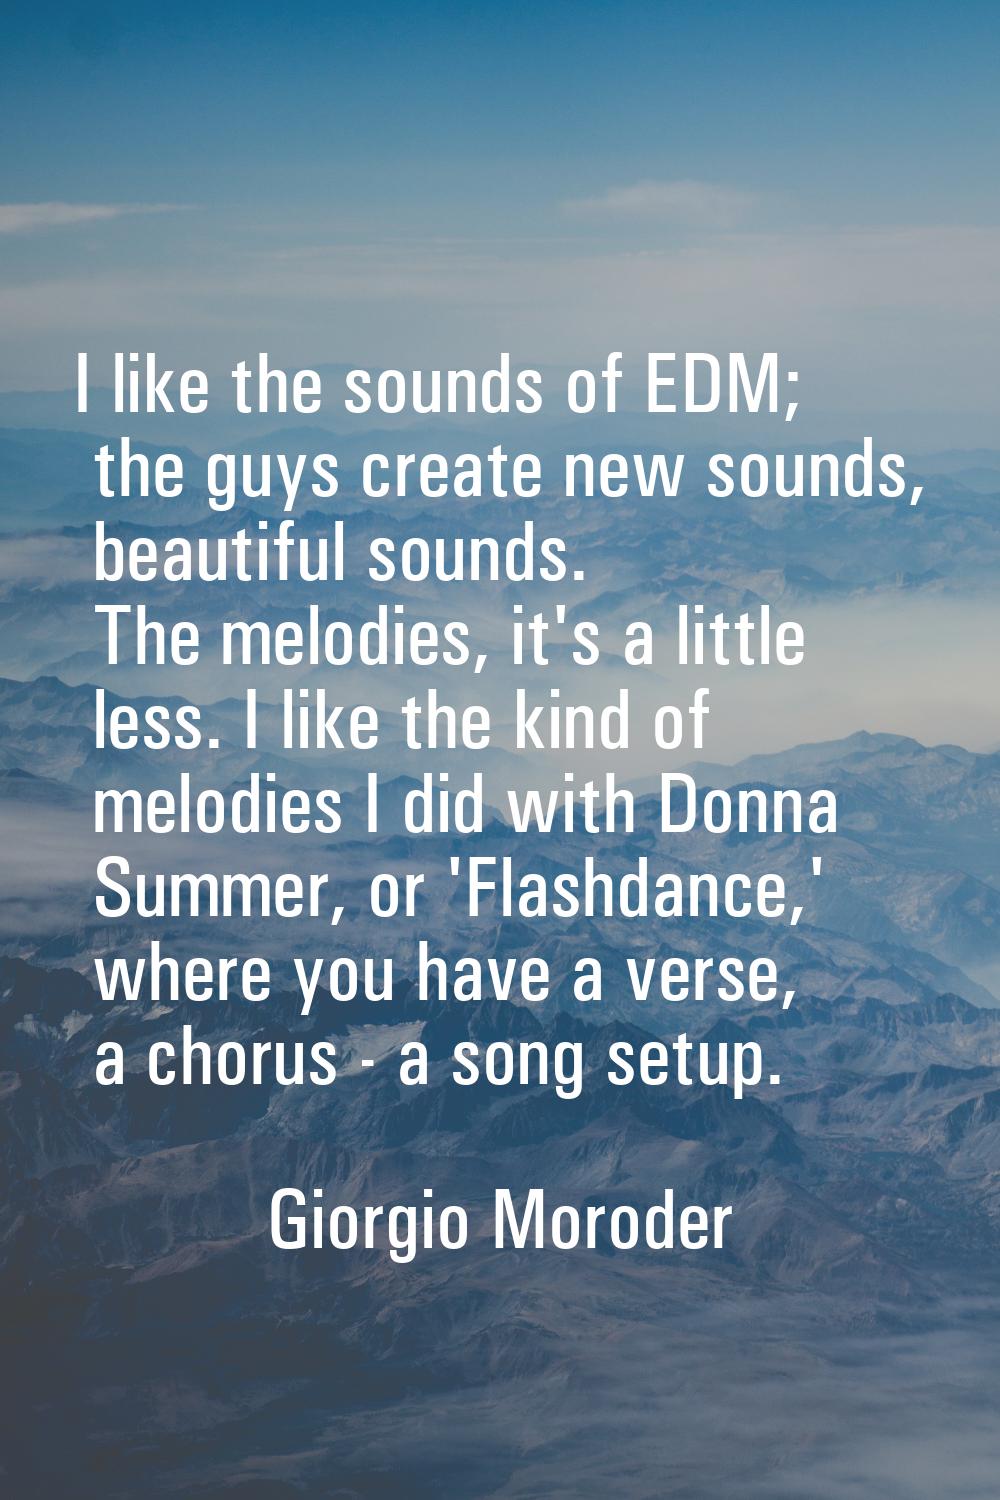 I like the sounds of EDM; the guys create new sounds, beautiful sounds. The melodies, it's a little